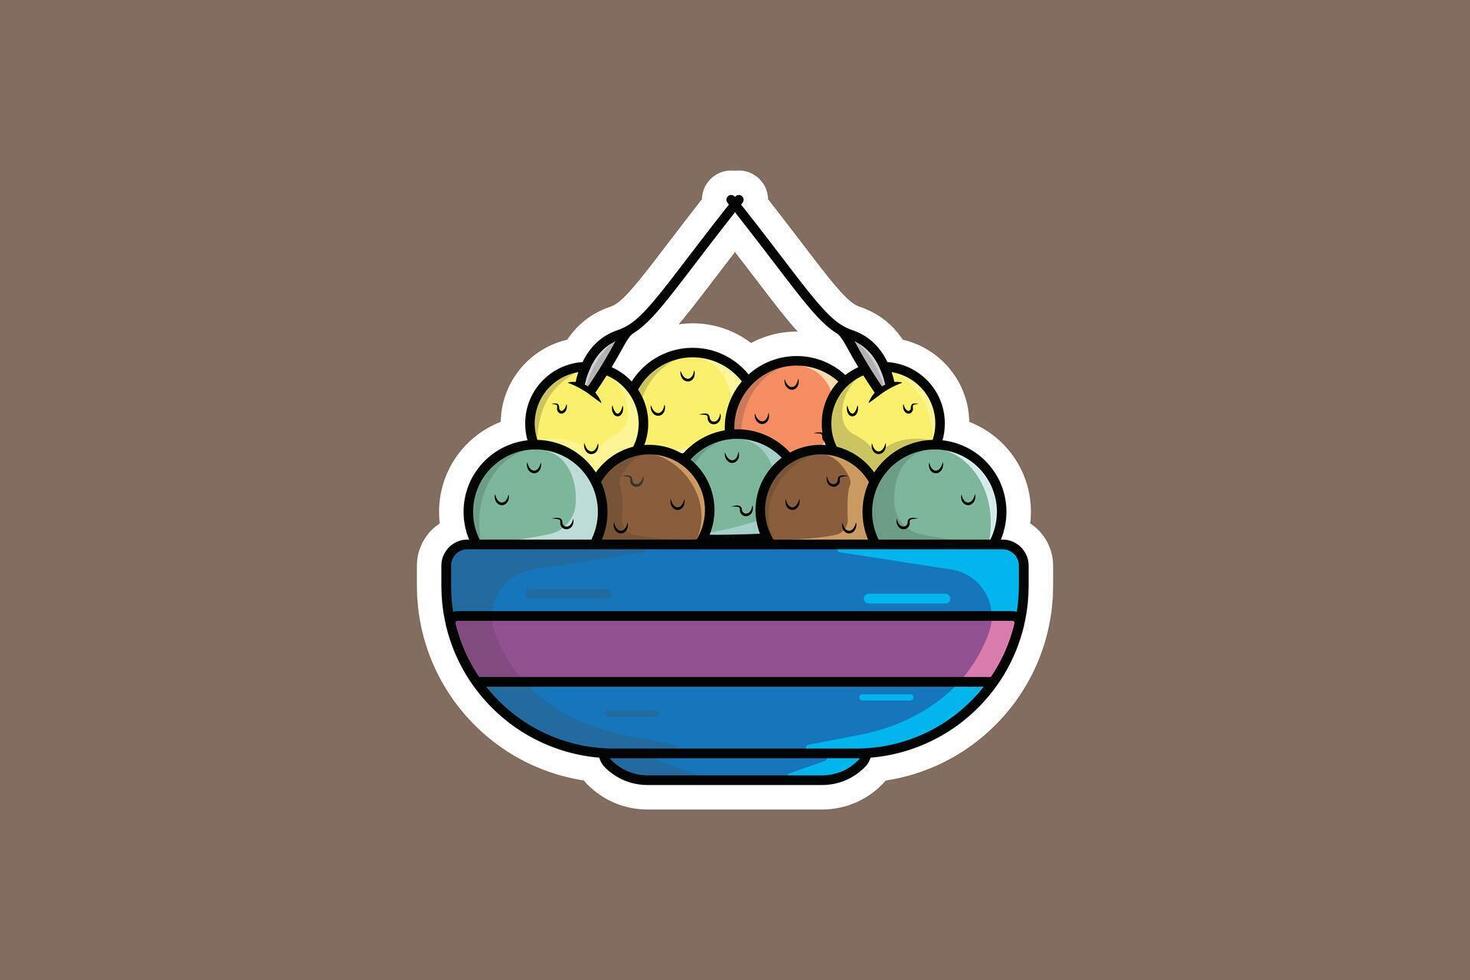 Delicious Ice Cream Cup Sticker vector illustration. Summer food and ice cream object icon concept. Ice cream plastic cup sticker vector design with shadow.